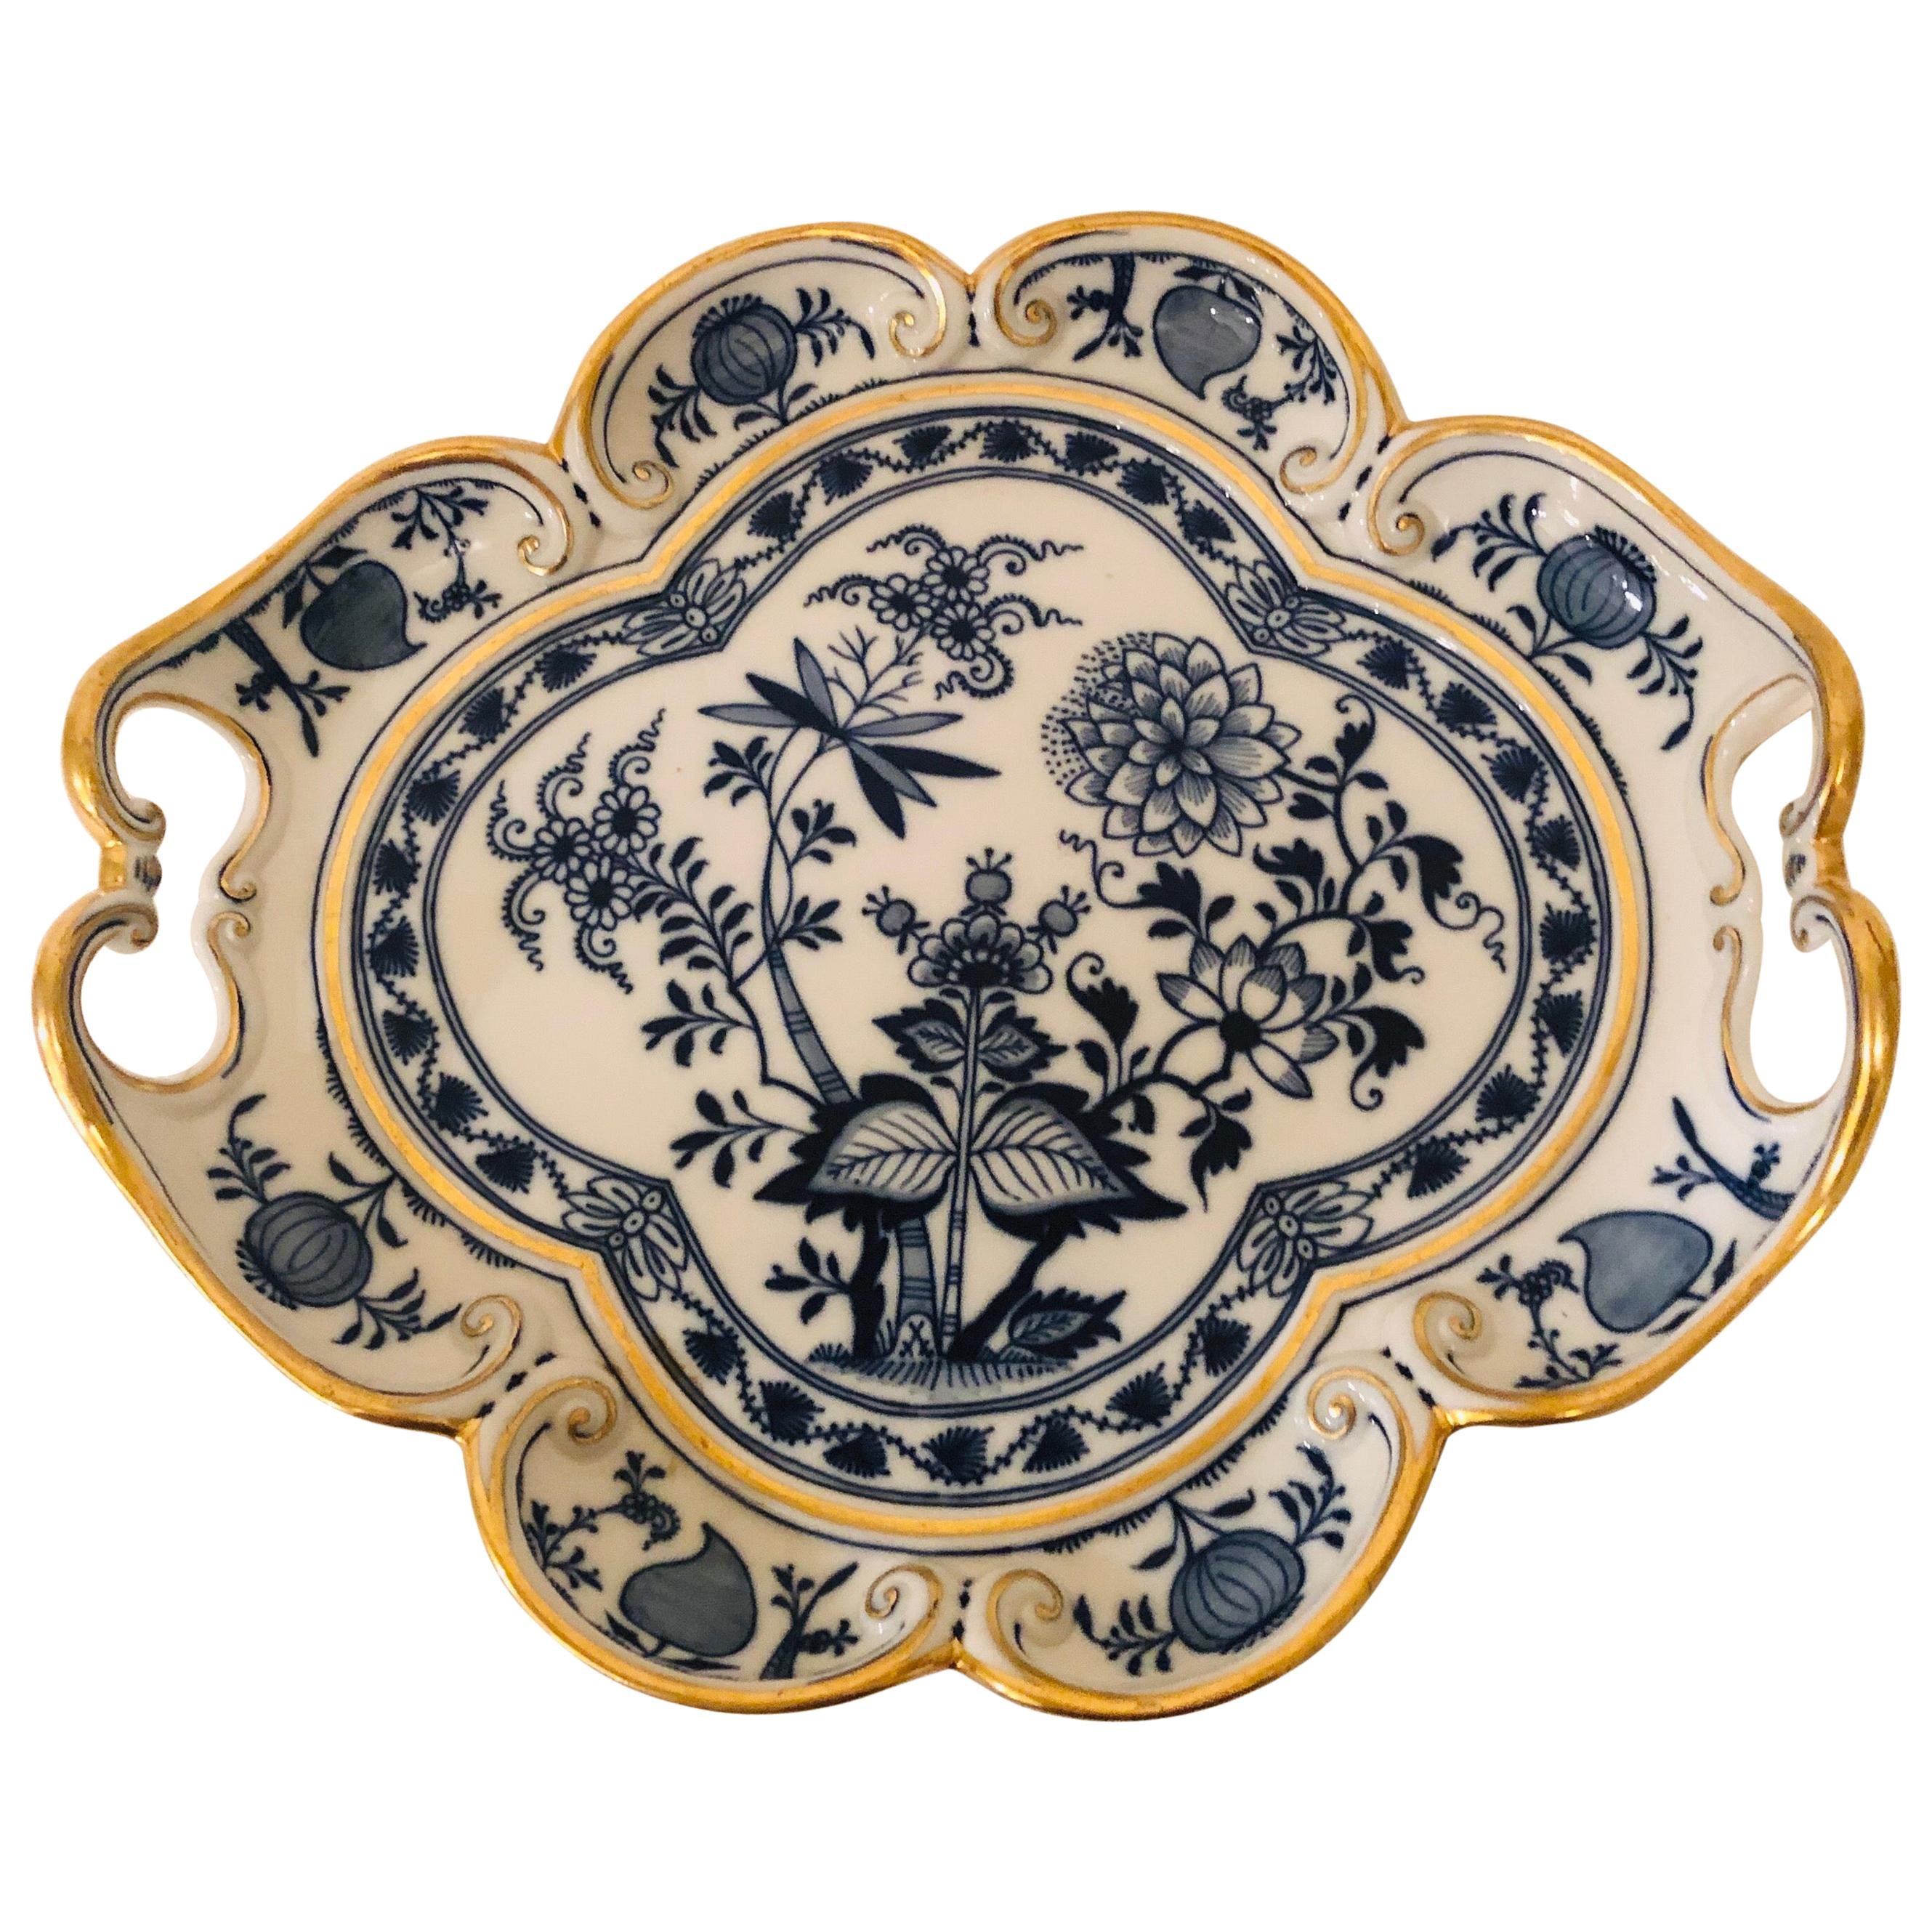 Meissen Blue Onion Fluted Serving Tray with Gold Border and Handles